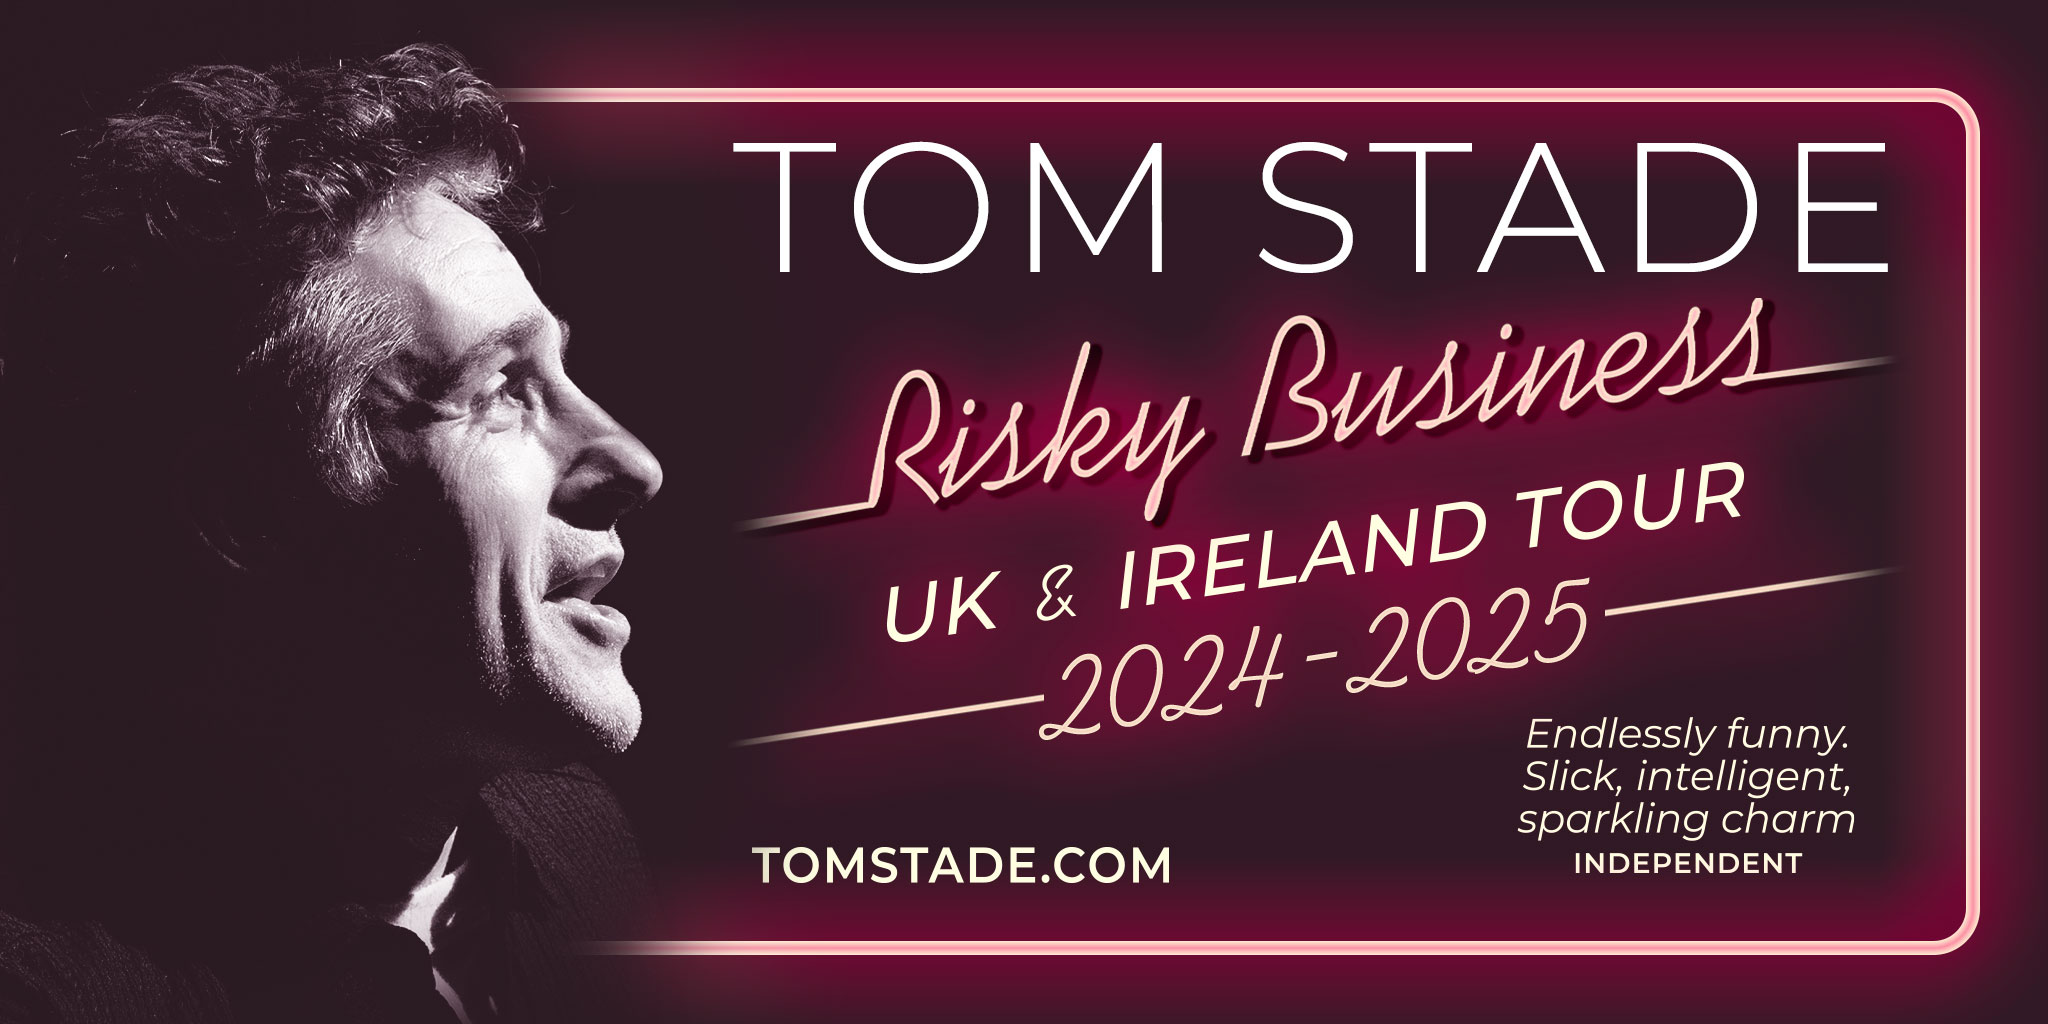 Tom is currently performing his show "Natural Born Killer" at the Melbourne Comedy Festival. He returns to the Edinburgh Festival in August 2024 with his new show, "Risky Business" (onsale now) and will tour across the UK & Ireland from September 2023 - March 2025 Tour Presale: 10 am, Weds 17 APRIL / General Sale: 10am, Fri 19 APRIL Tickets available from TICKETMASTER and at venues